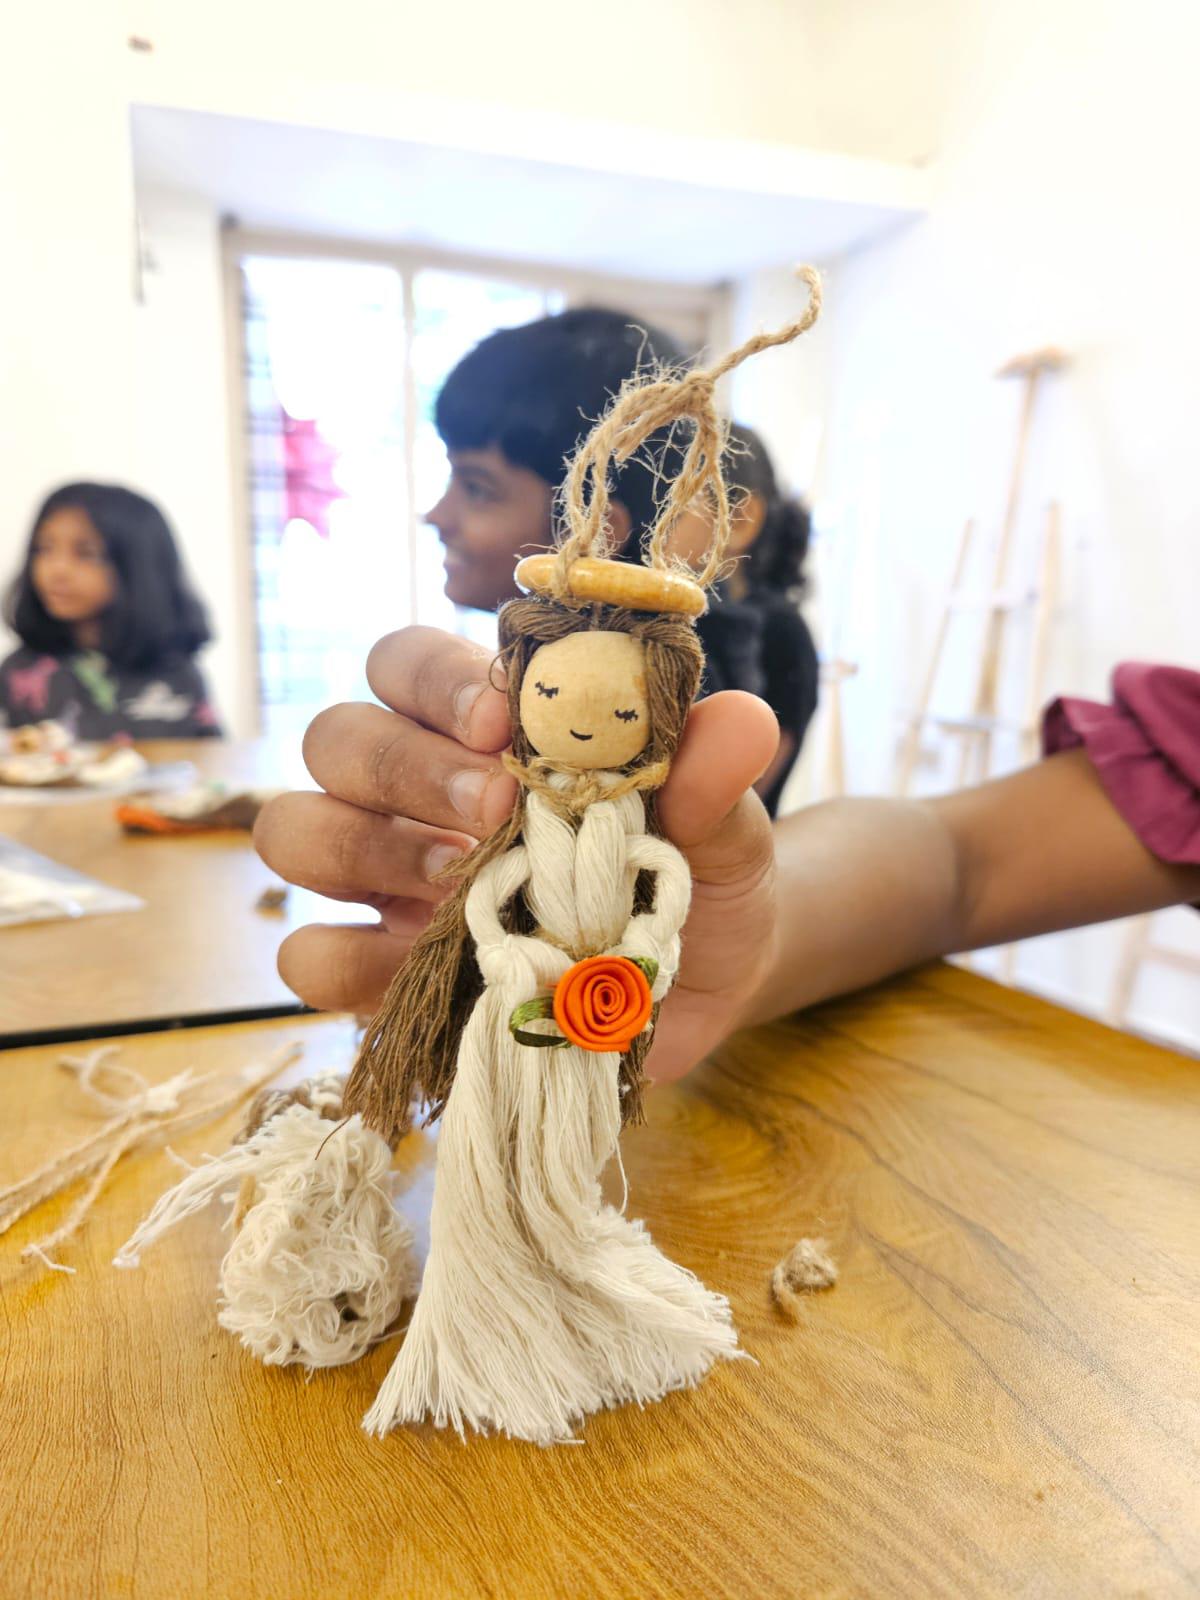 From macrame doll making workshop at The Whitepaper Creative